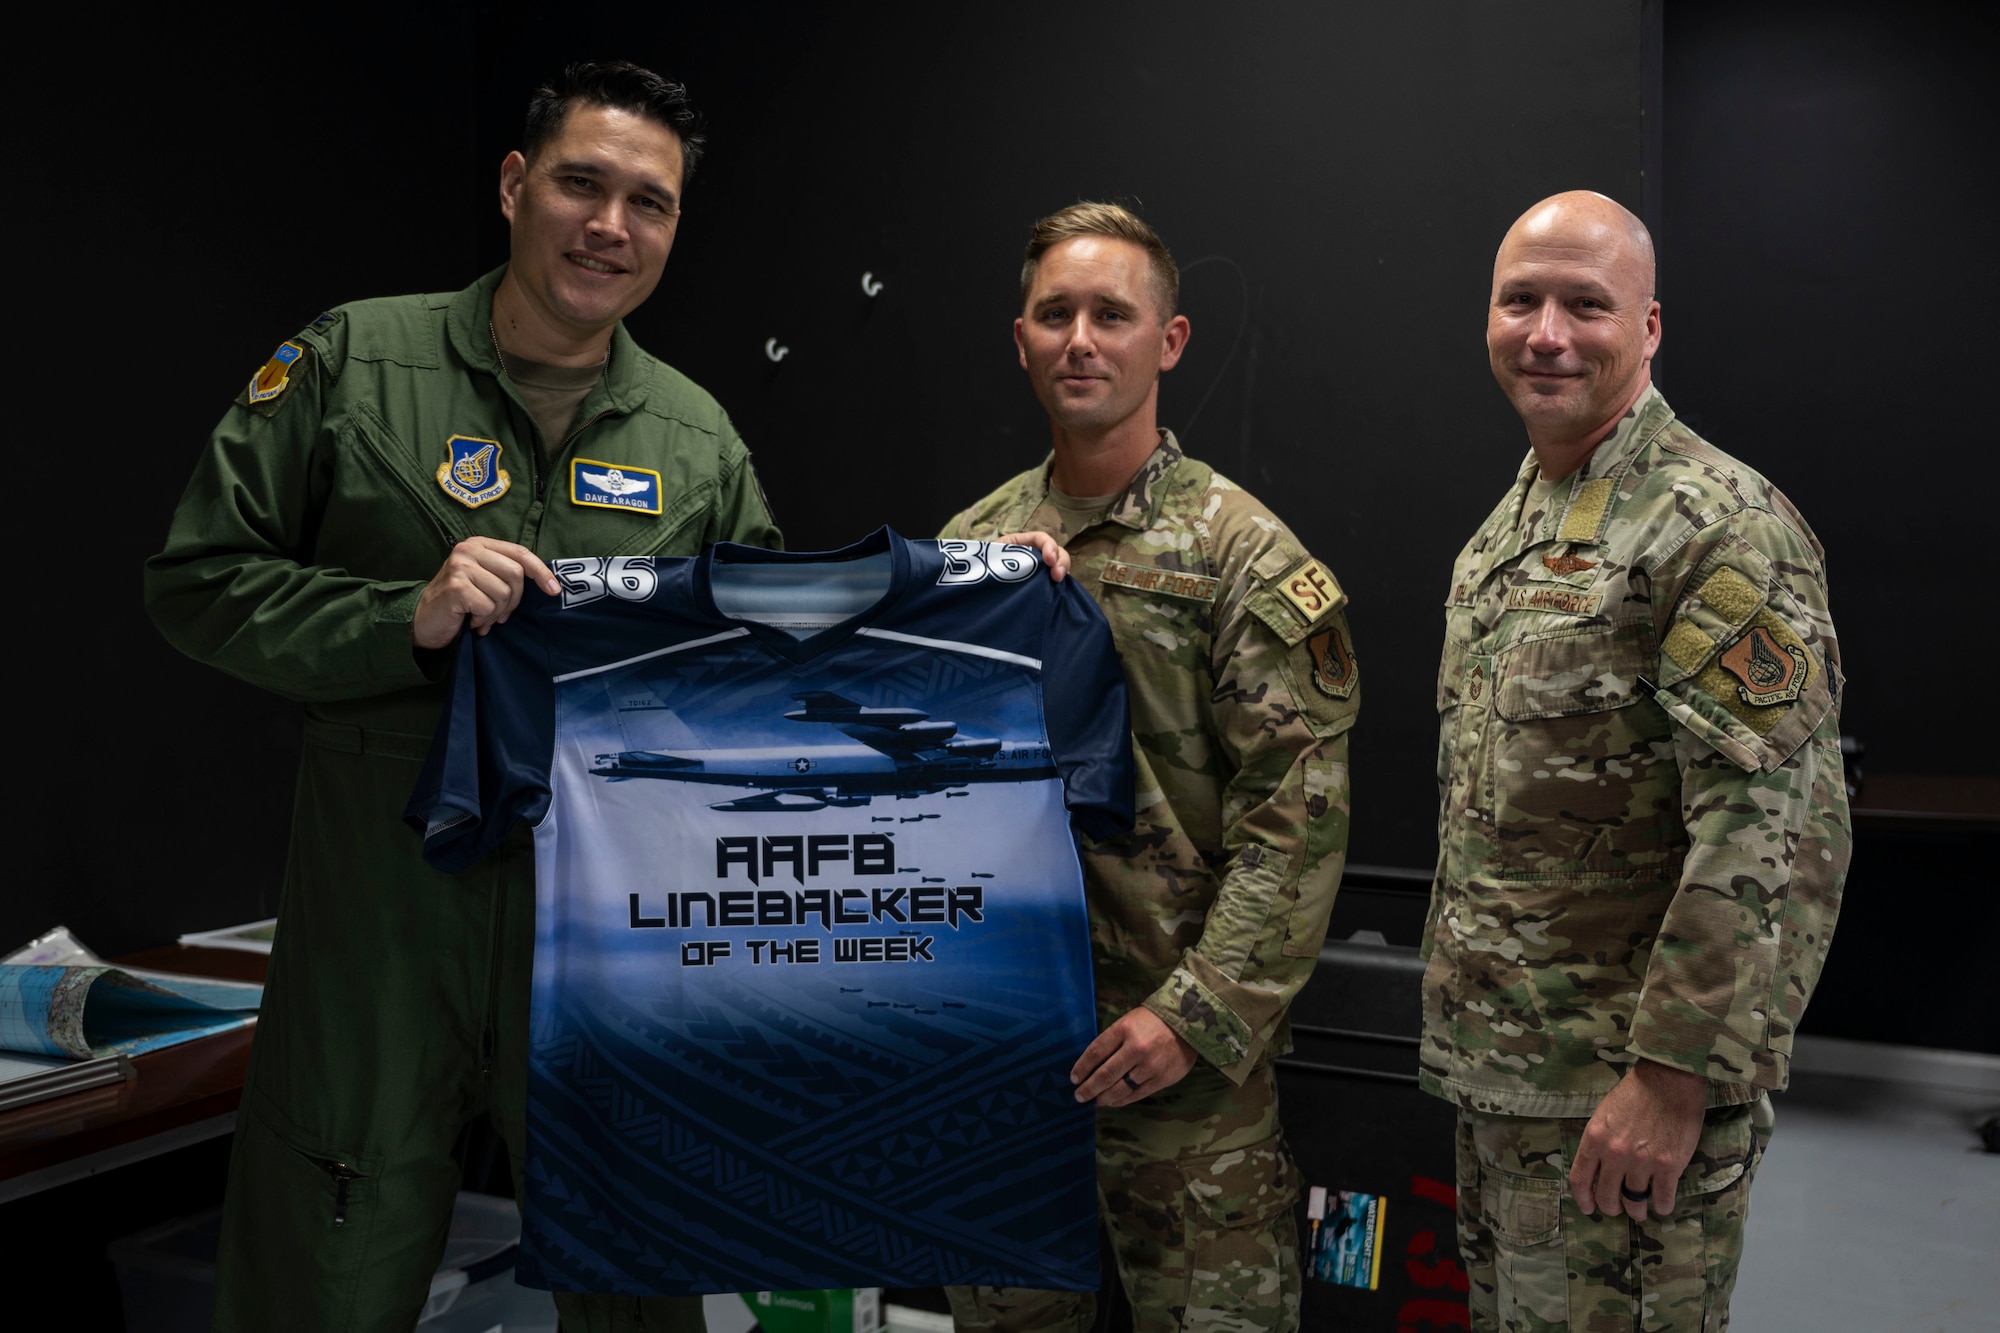 U.S. Air Force Tech. Sgt. David Gwin, a contingency response flight squad leader with the 736th Security Forces Squadron, poses with the Linebacker of the Week jersey with U.S. Air Force Col. David Aragon, 36th Wing vice commander, and U.S. Chief Master Sgt. Brian Smith, 36th Operations Group superintendent, at Andersen Air Force Base, Guam, April 20, 2022.